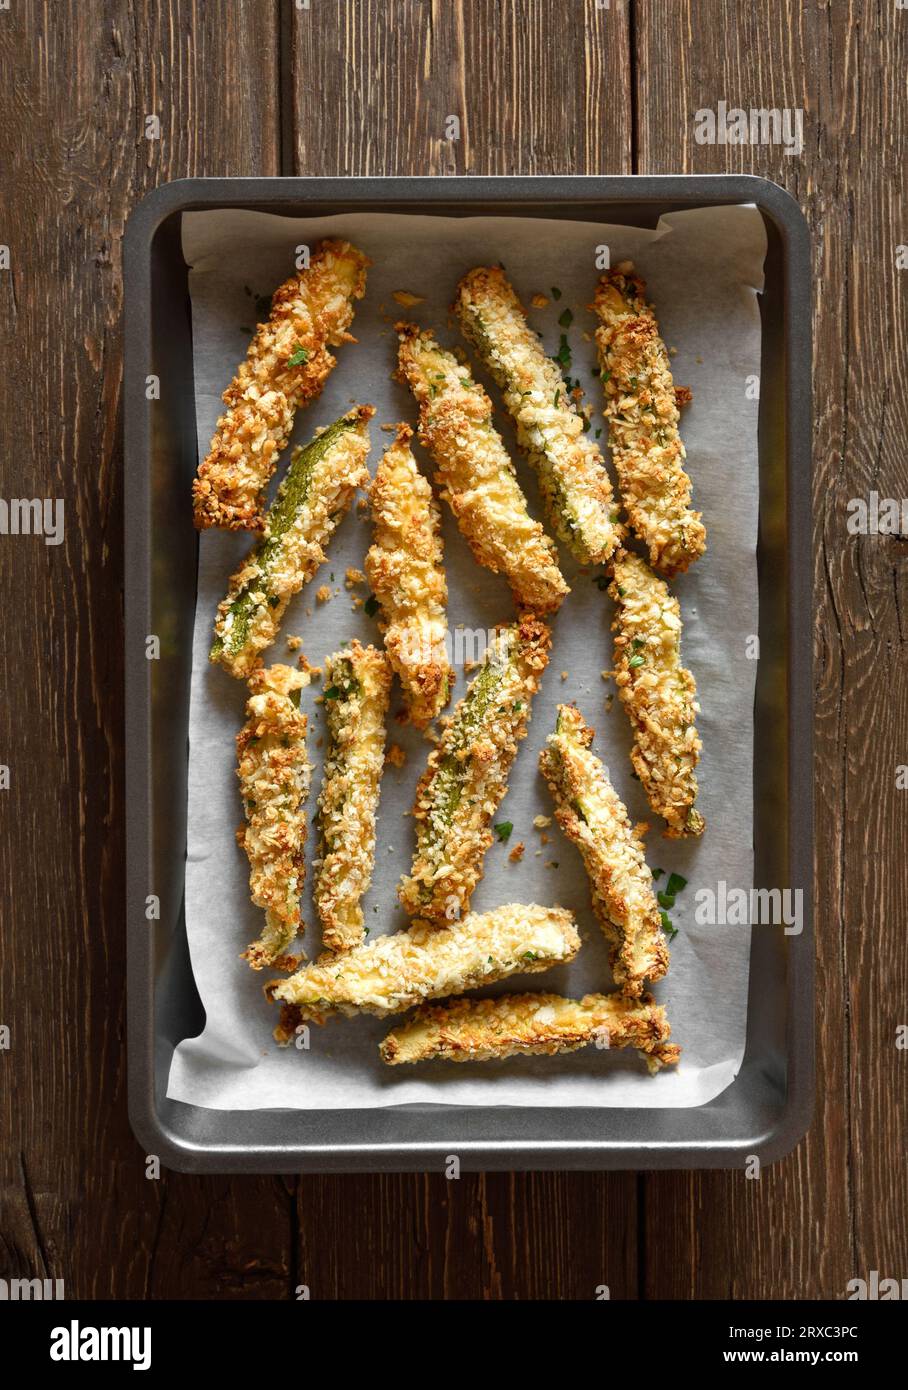 Zucchini sticks with panko breadcrumbs in baking dish over wooden background. Top view, flat lay Stock Photo